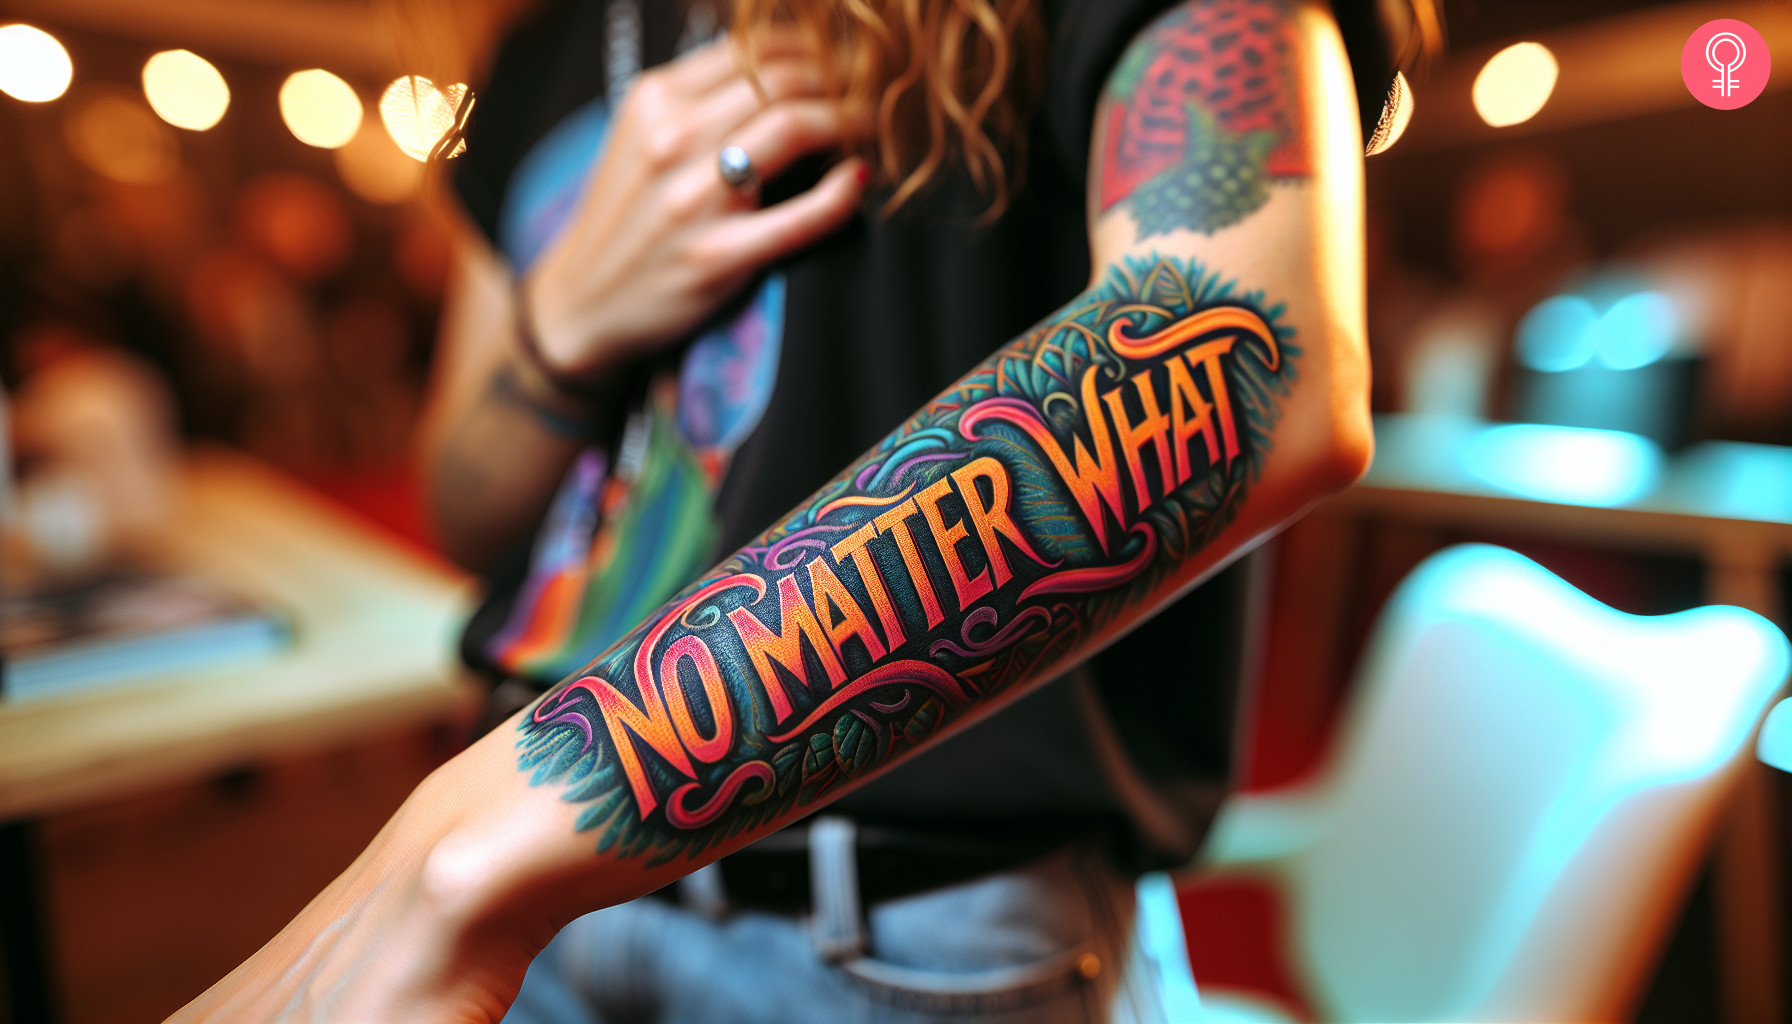 Colored ‘no matter what’ tattoo on the forearm of a woman